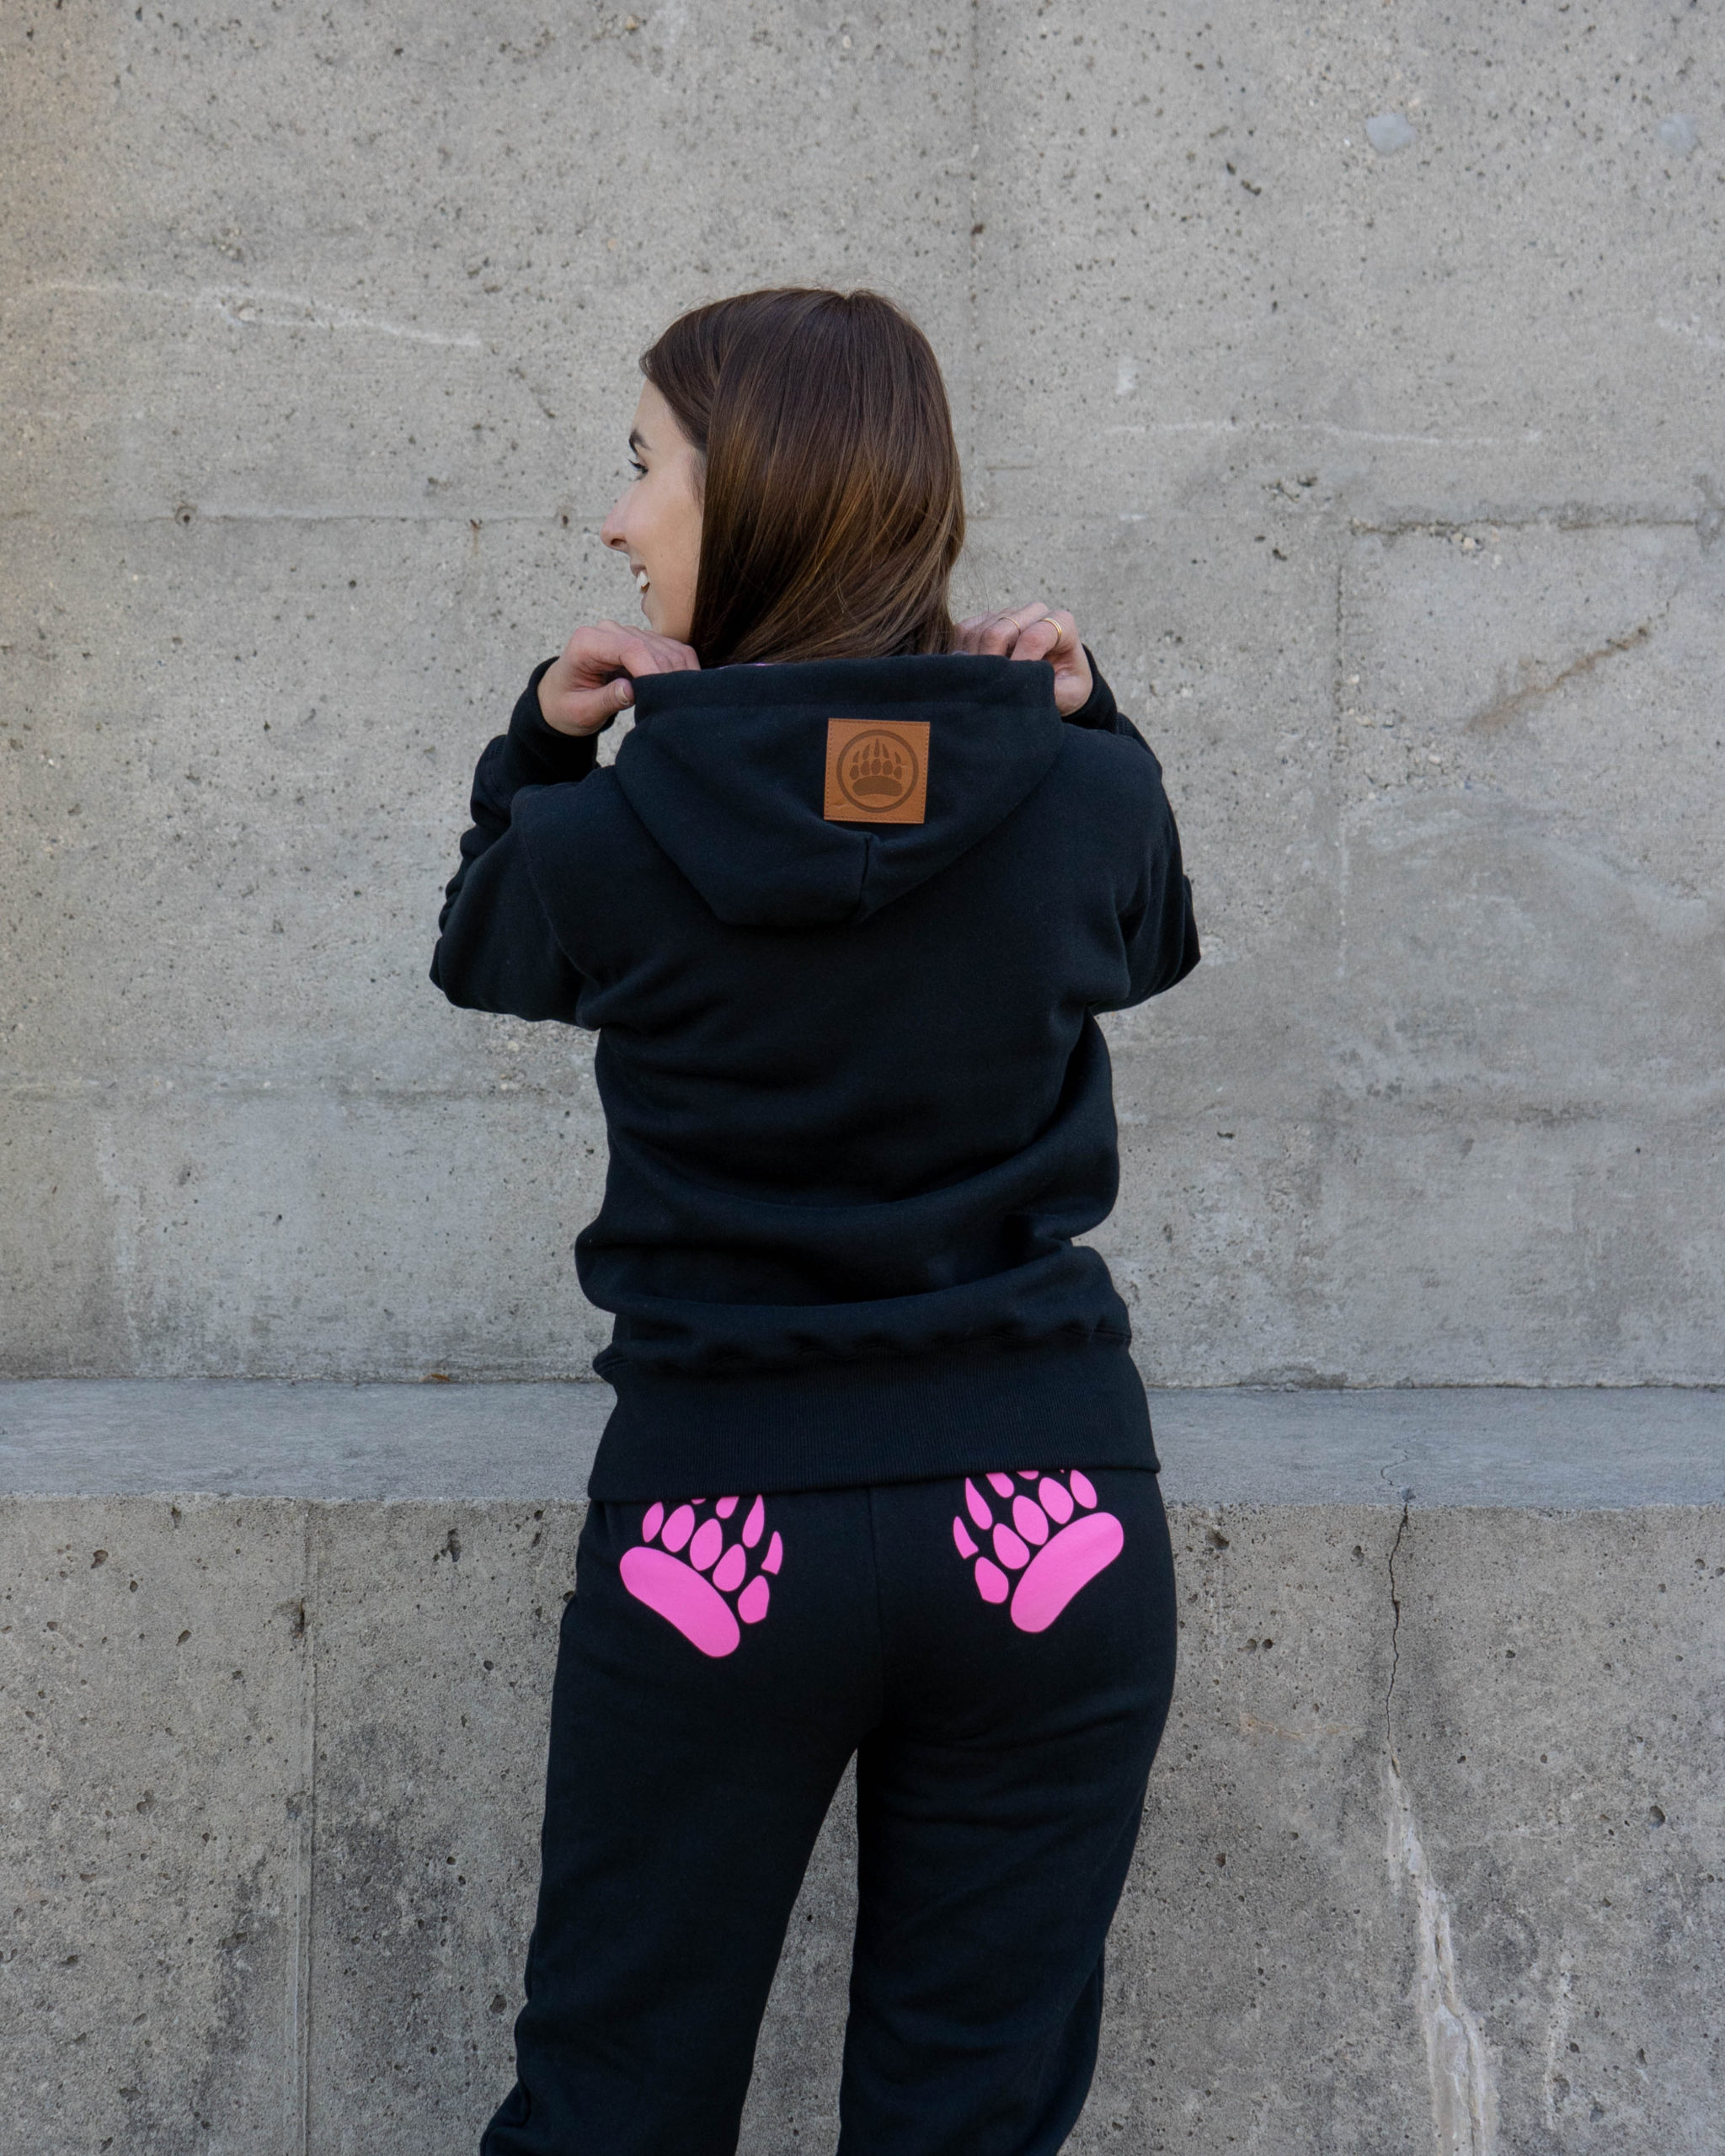 Content Creator Em wearing the Black with Raspberry Ladies Cabin Hoody and Original Paw Pants